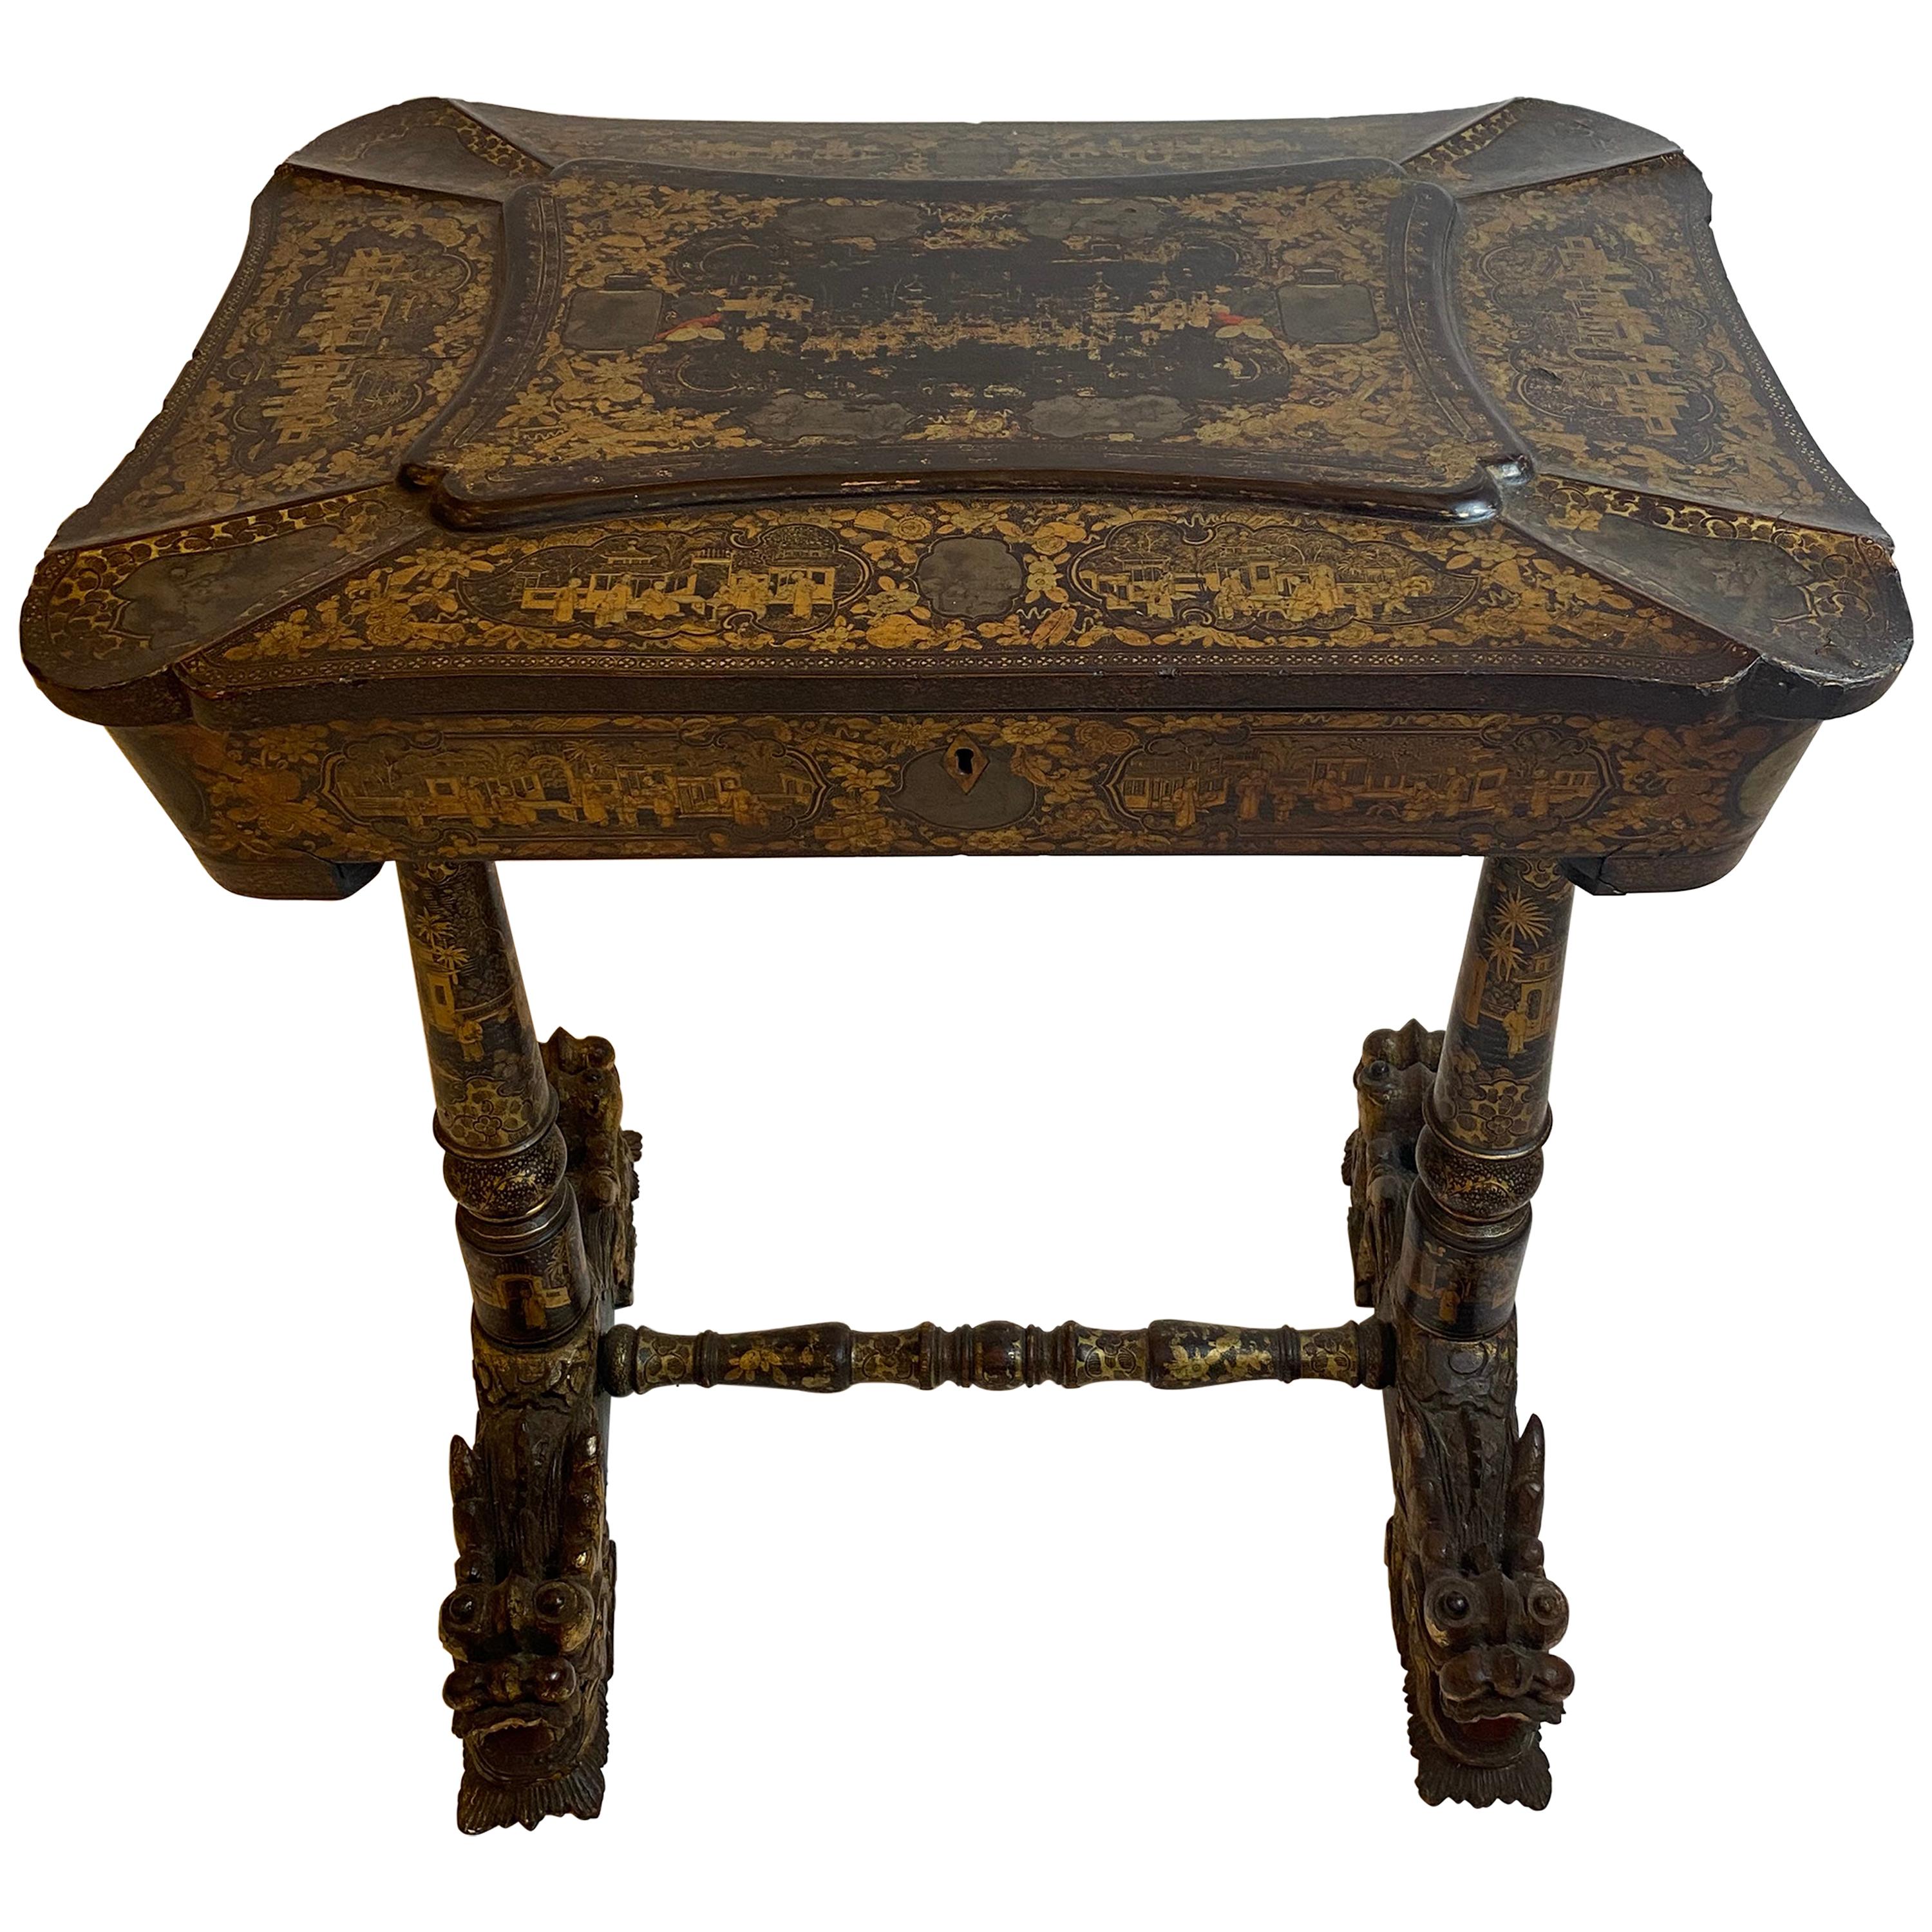 Early 19th Century Chinese Export Lacquer and Gilt Work Table For Sale